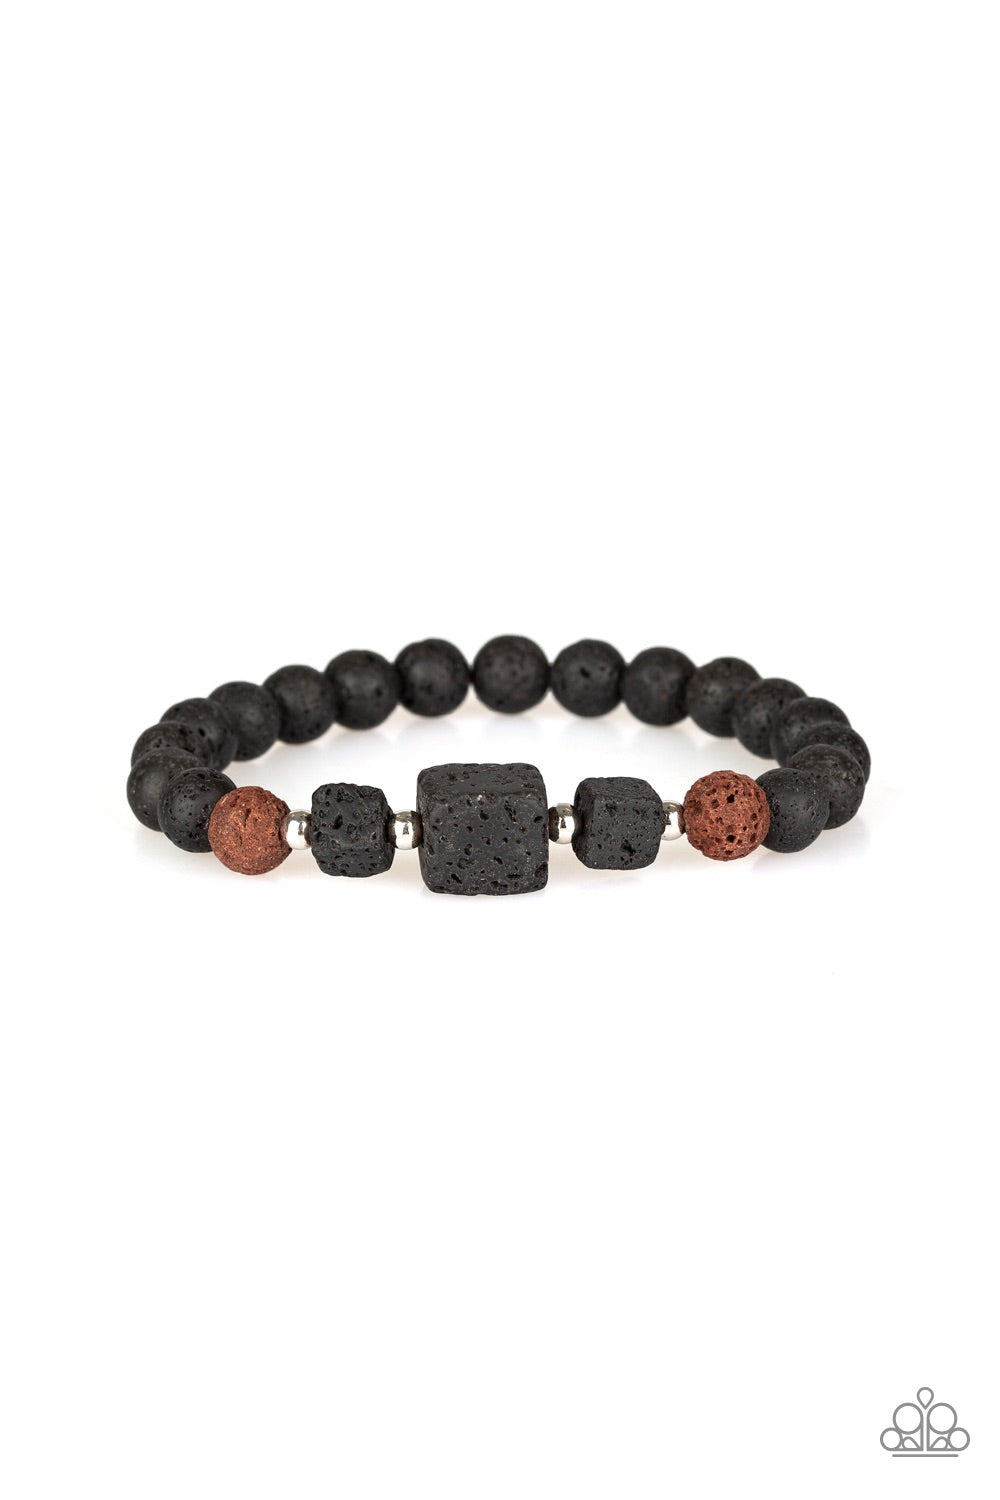 Refreshed and Rested Brown-Urban Bracelet